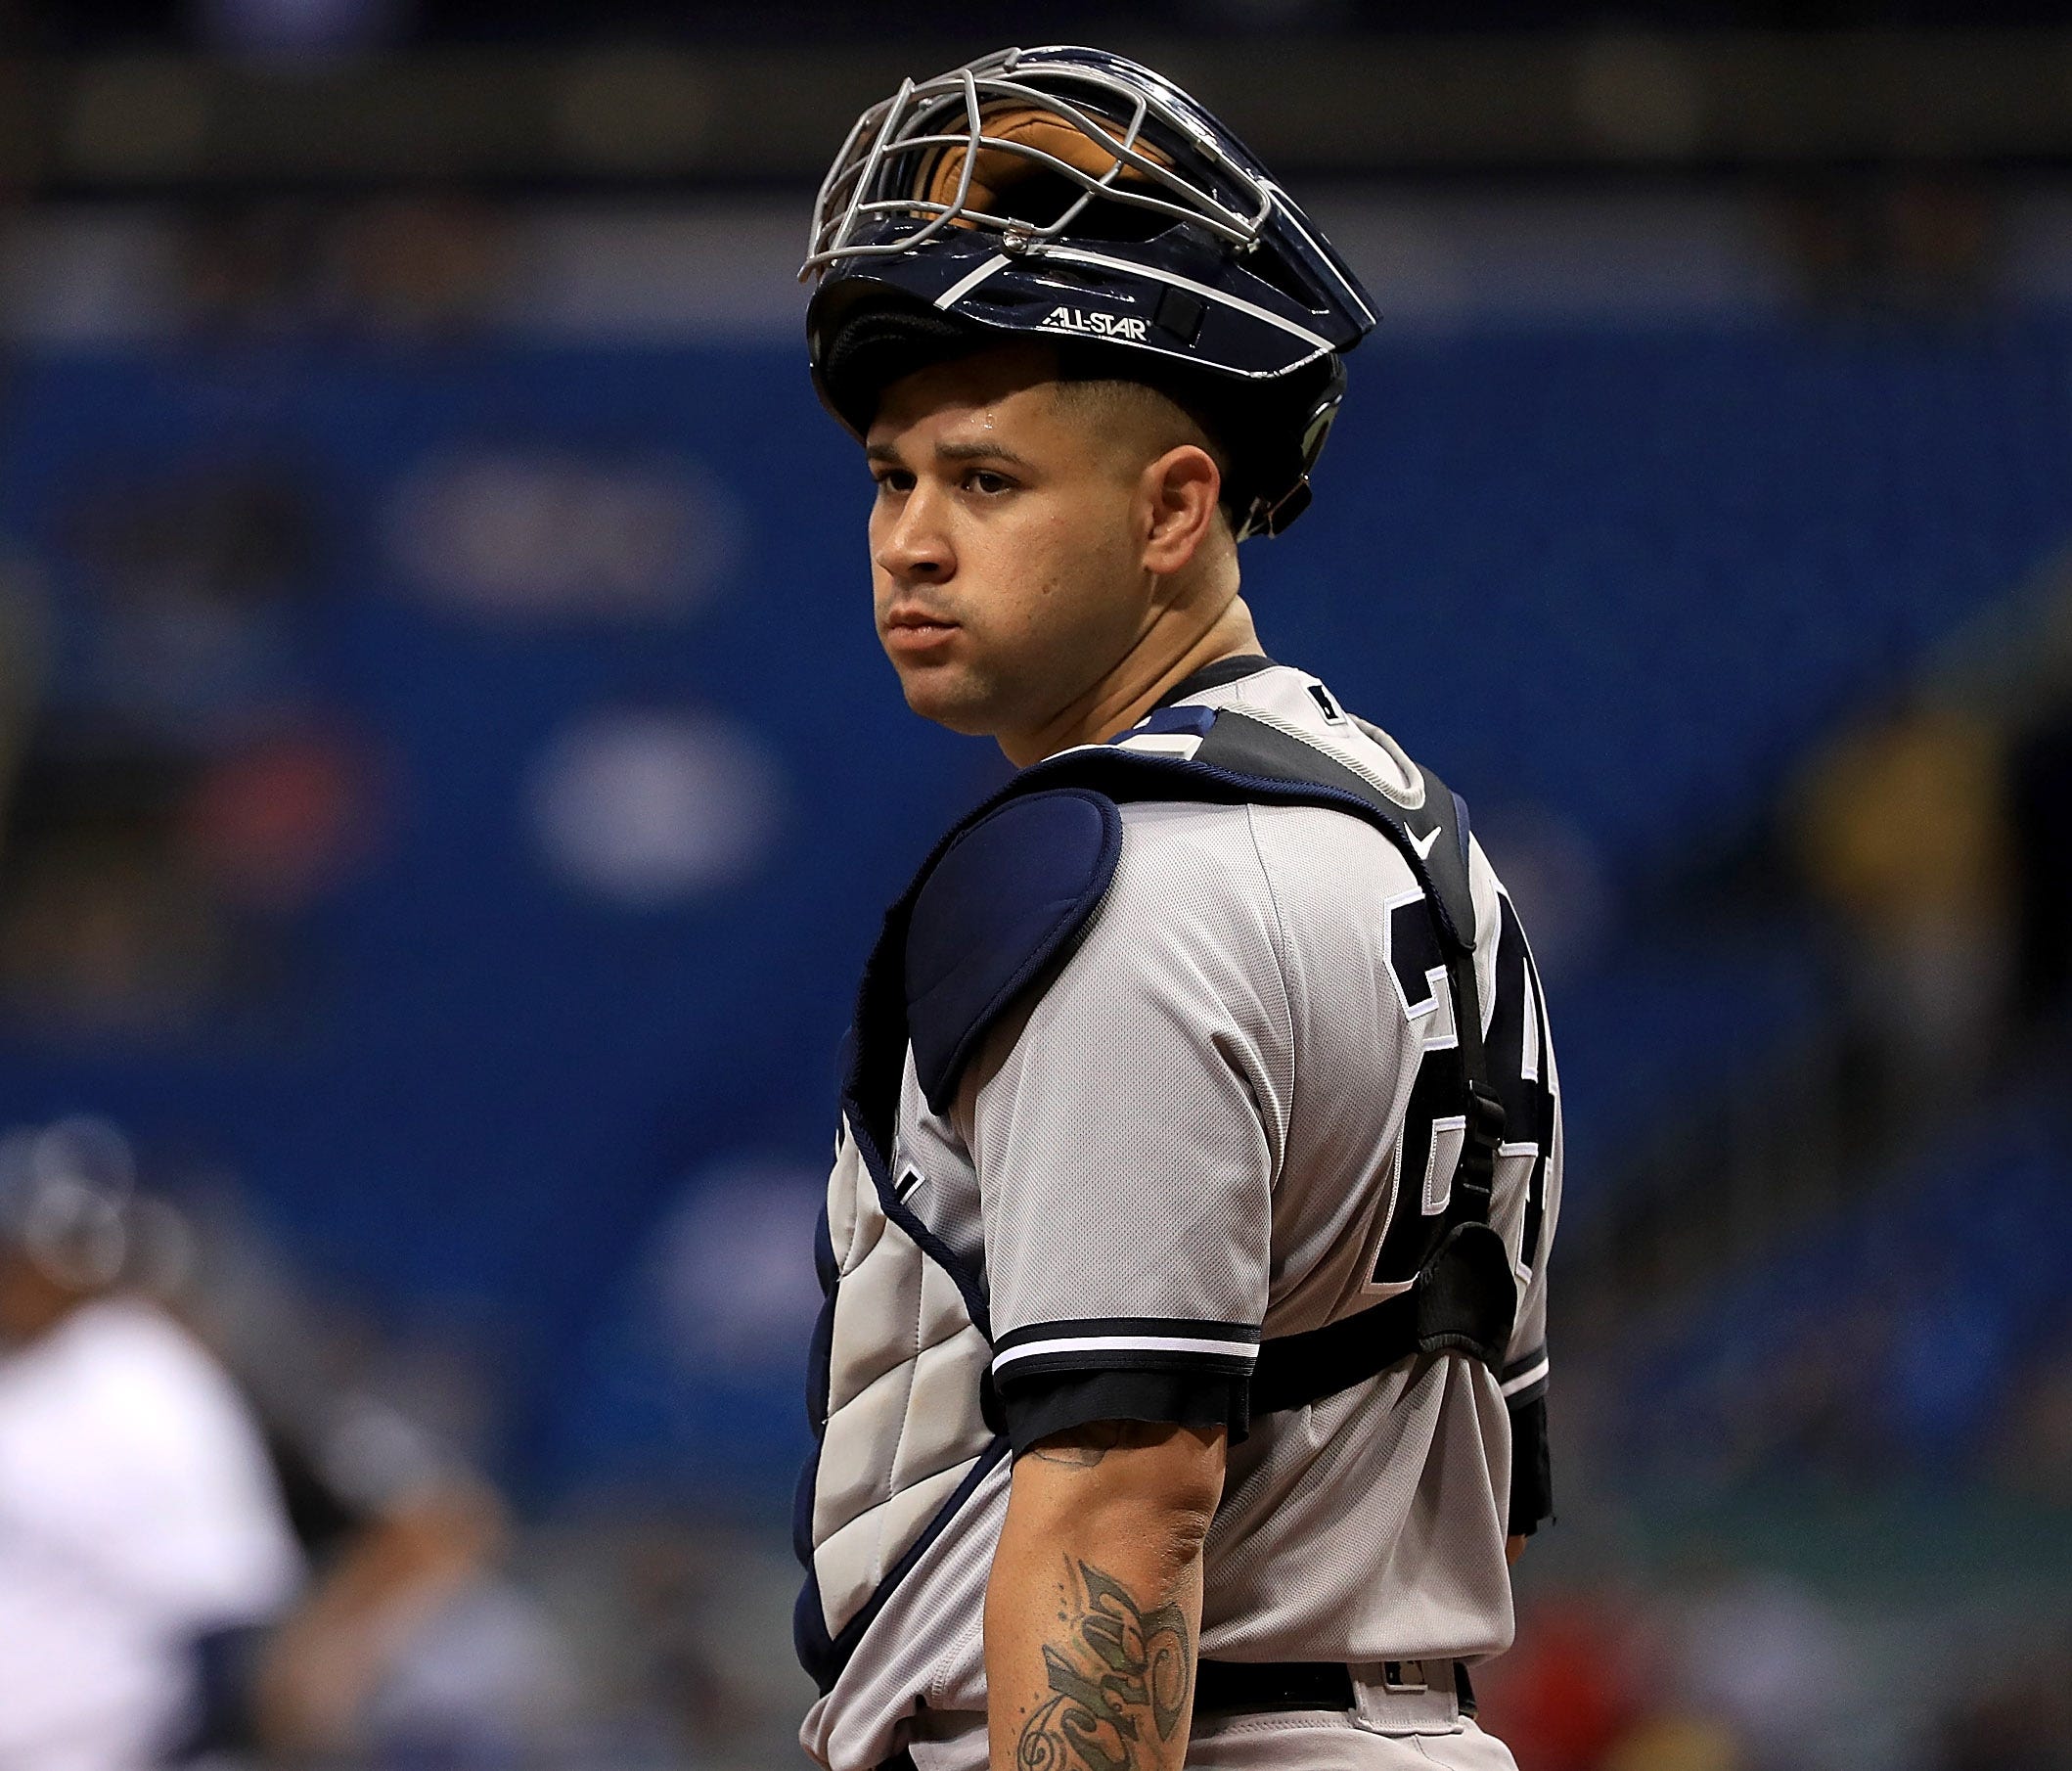 Gary Sanchez looks on during the New York Yankees' game against the Tampa Bay Rays.